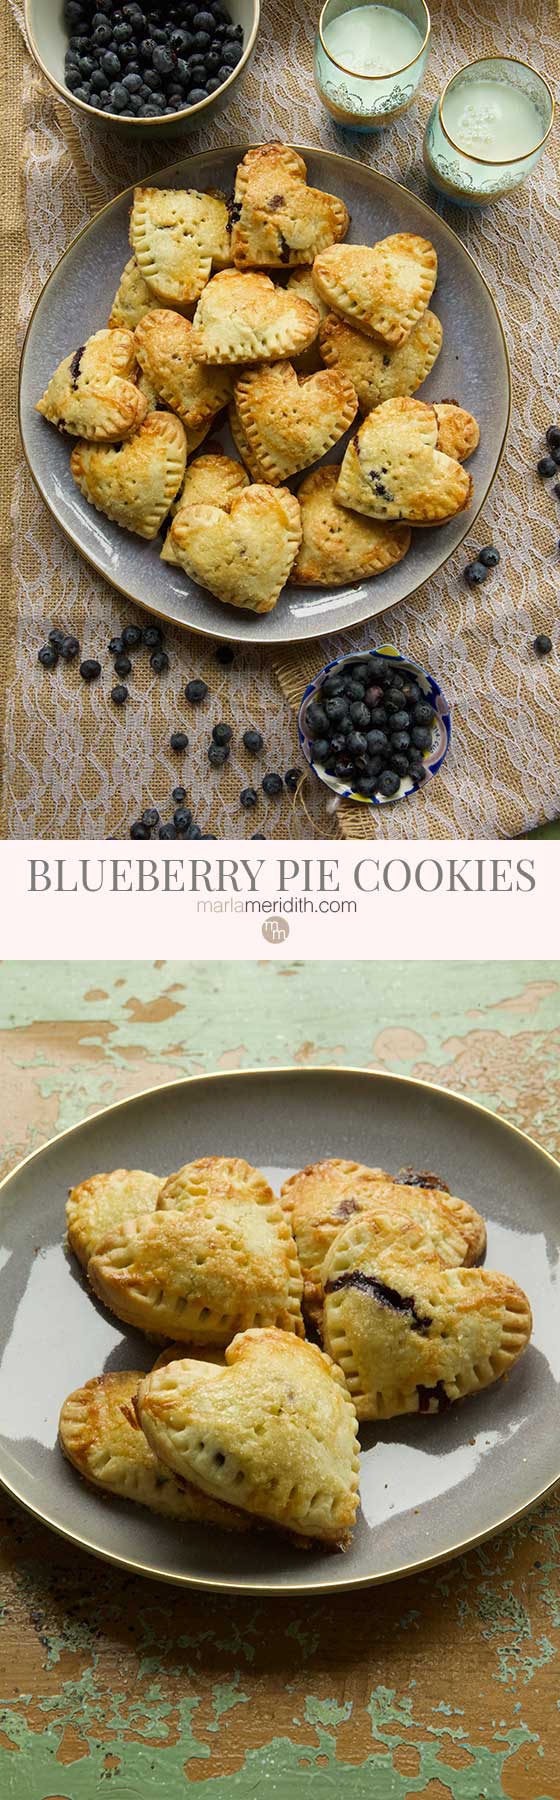 We are completely smitten with these Blueberry Pie Cookies. This recipe is great for entertaining and it will assure you don't eat the entire pie!  MarlaMeridith.com